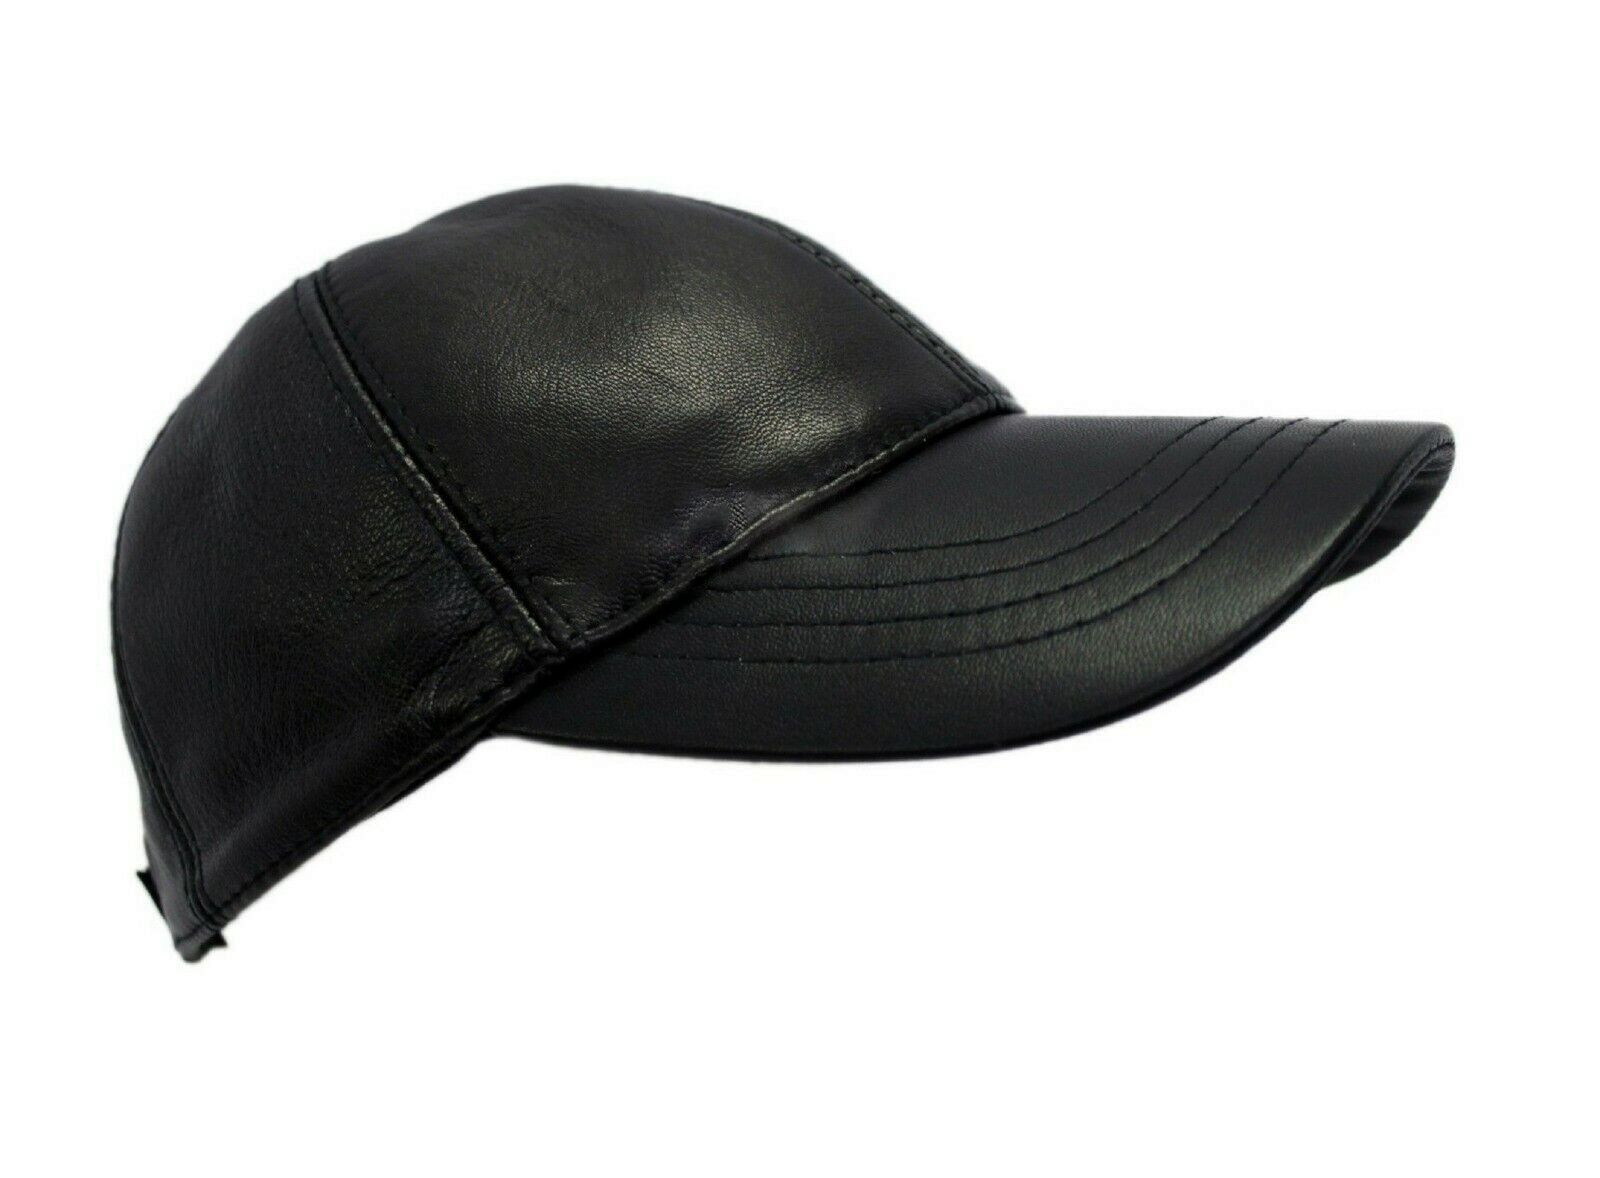 Leather Baseball Cap Black Adjustable Size - Online Style Hats Panama UK, Buy Winter Hats, Black Trilby, Beanie Hat Mens, Women's Fashion Scarves  for Sale